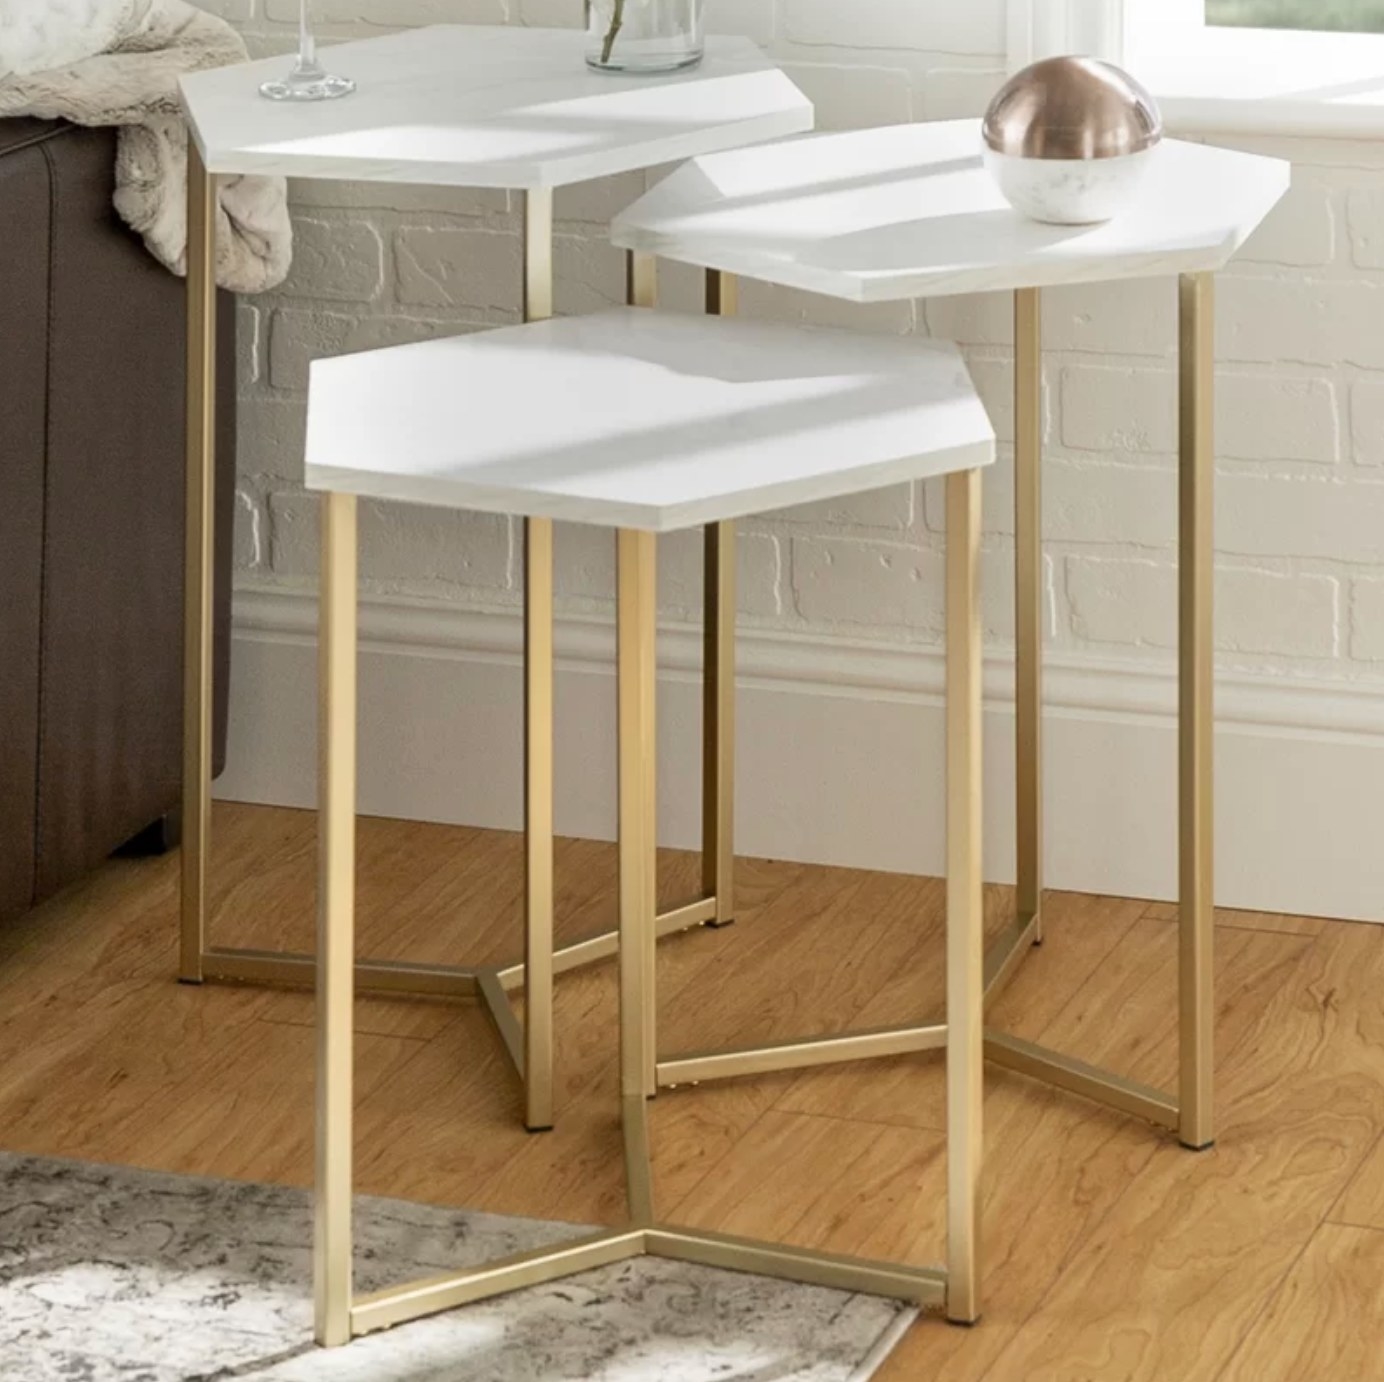 The nesting tables in white and gold